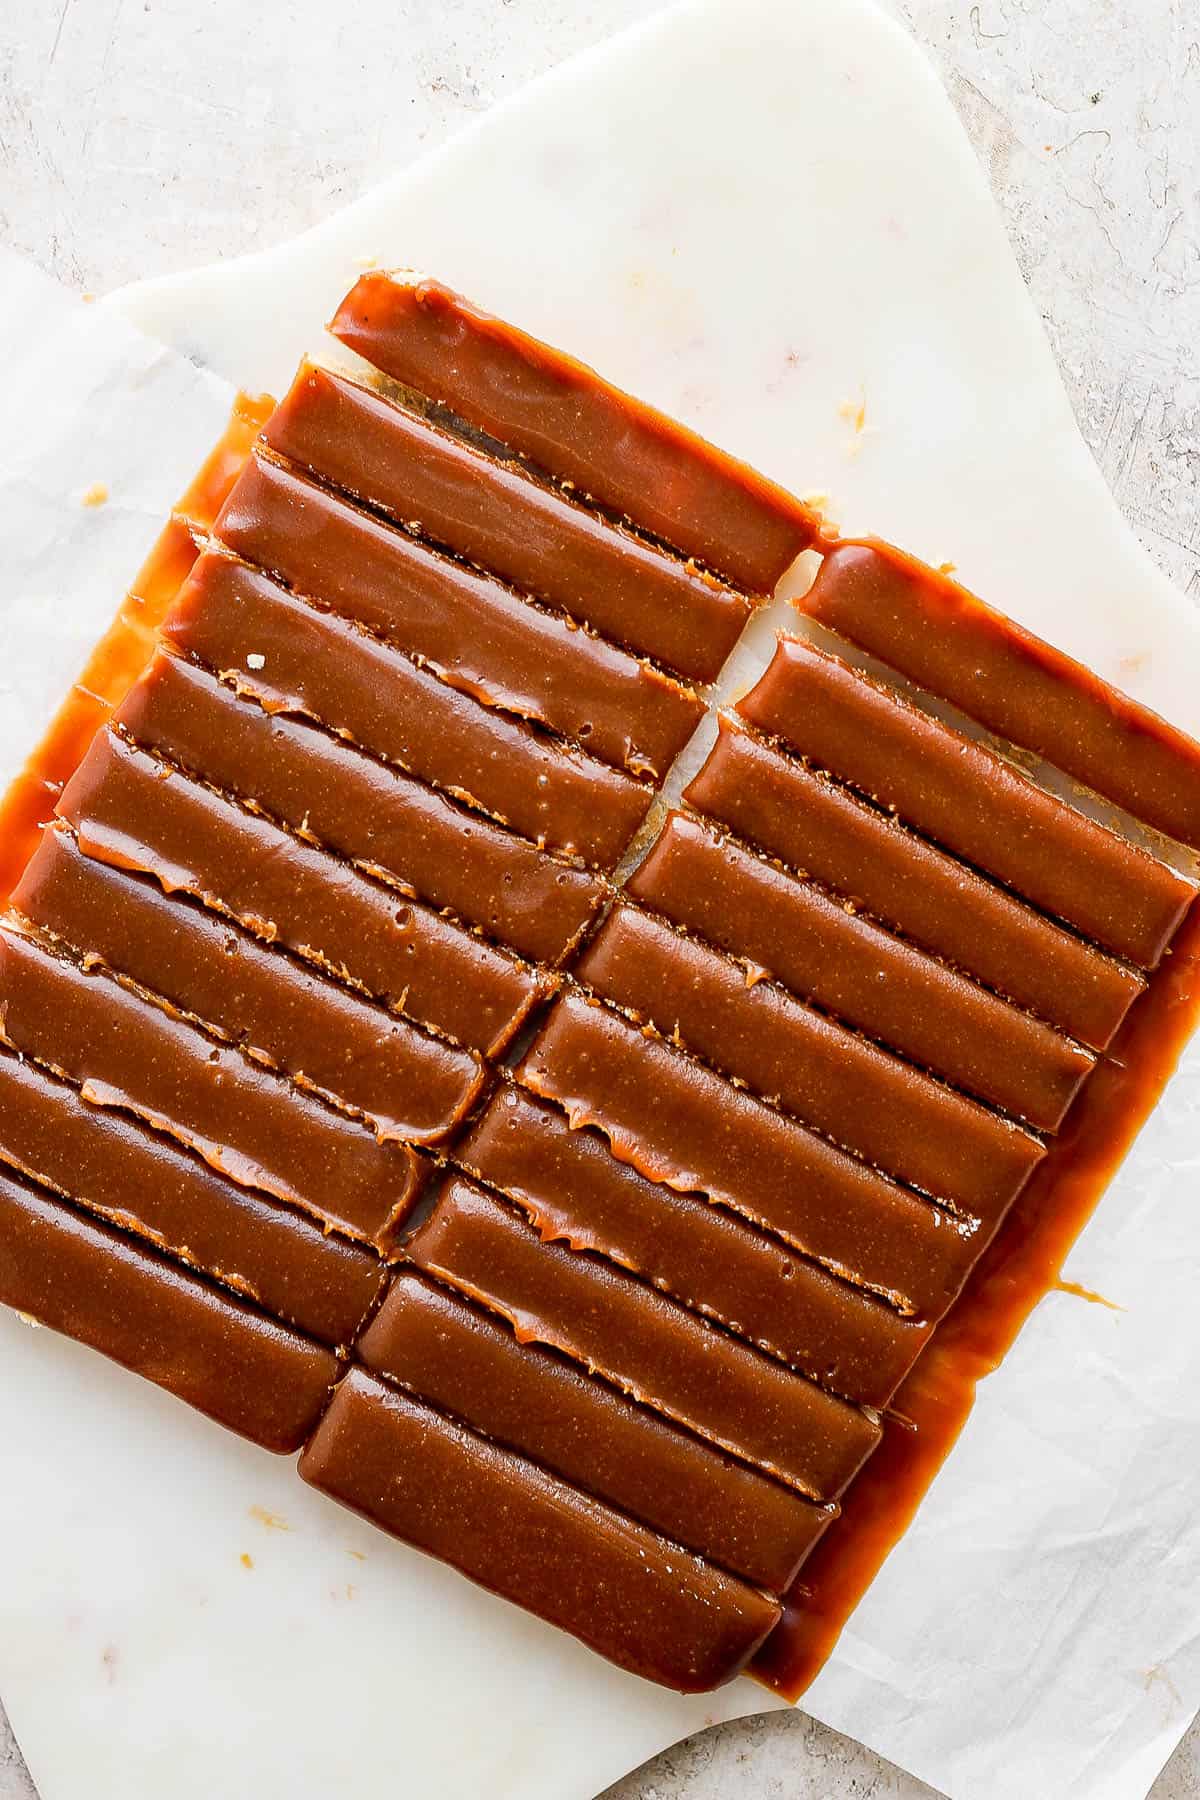 The caramel-covered shortbread cut into 12 bars.